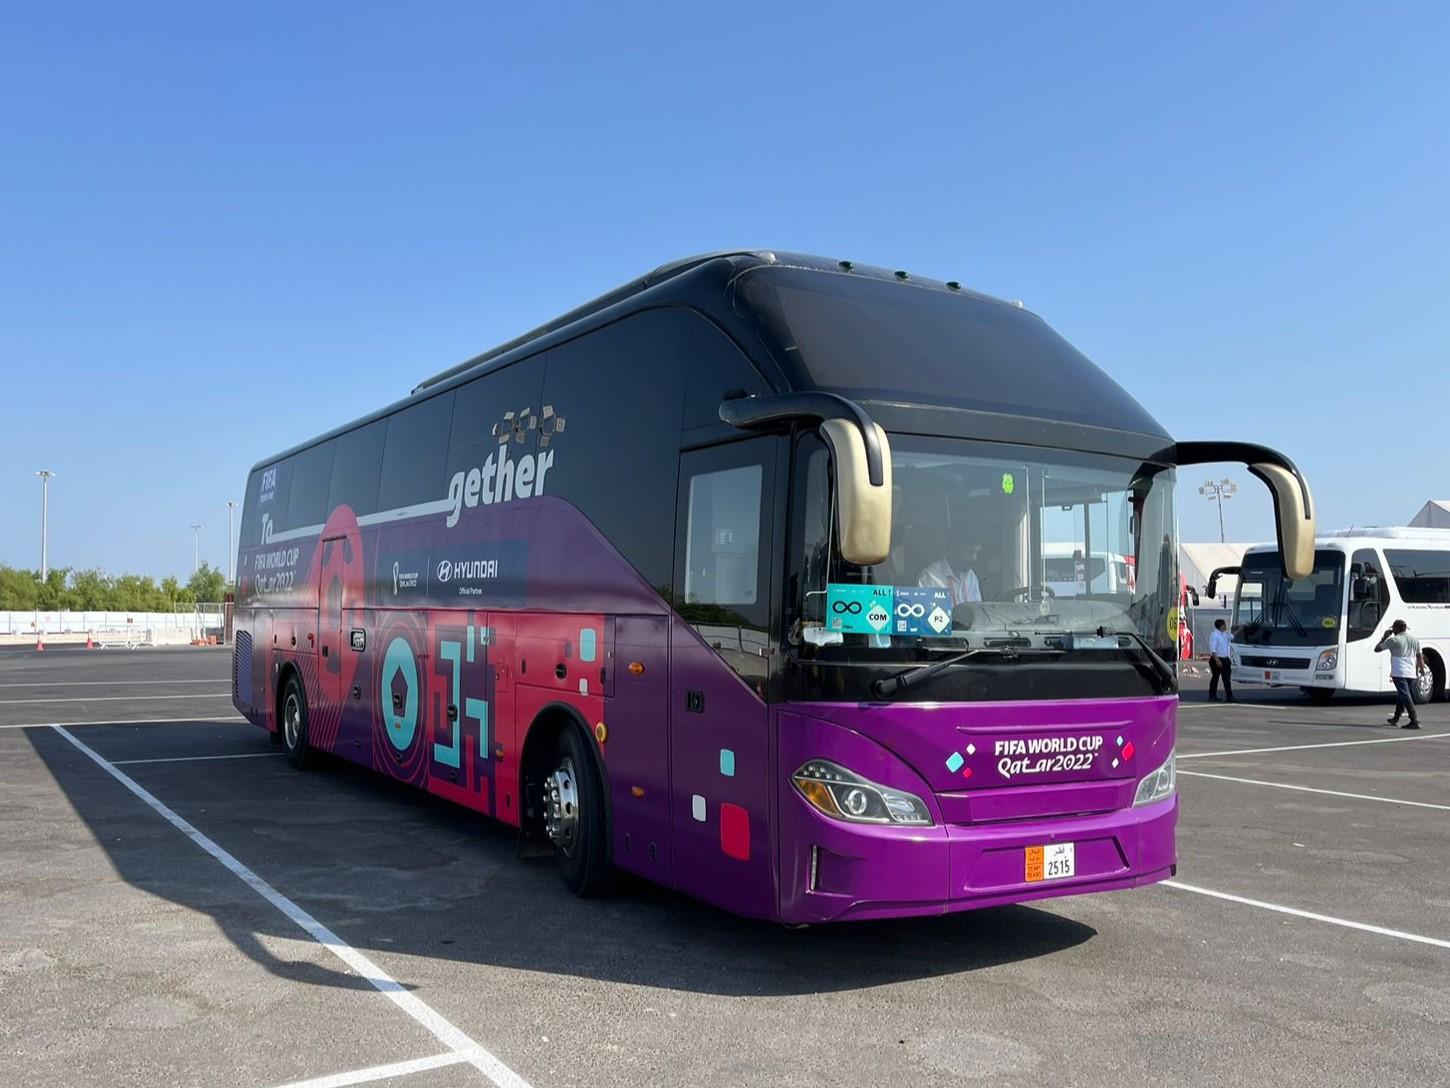 A purple bus parked in a parking lot

Description automatically generated